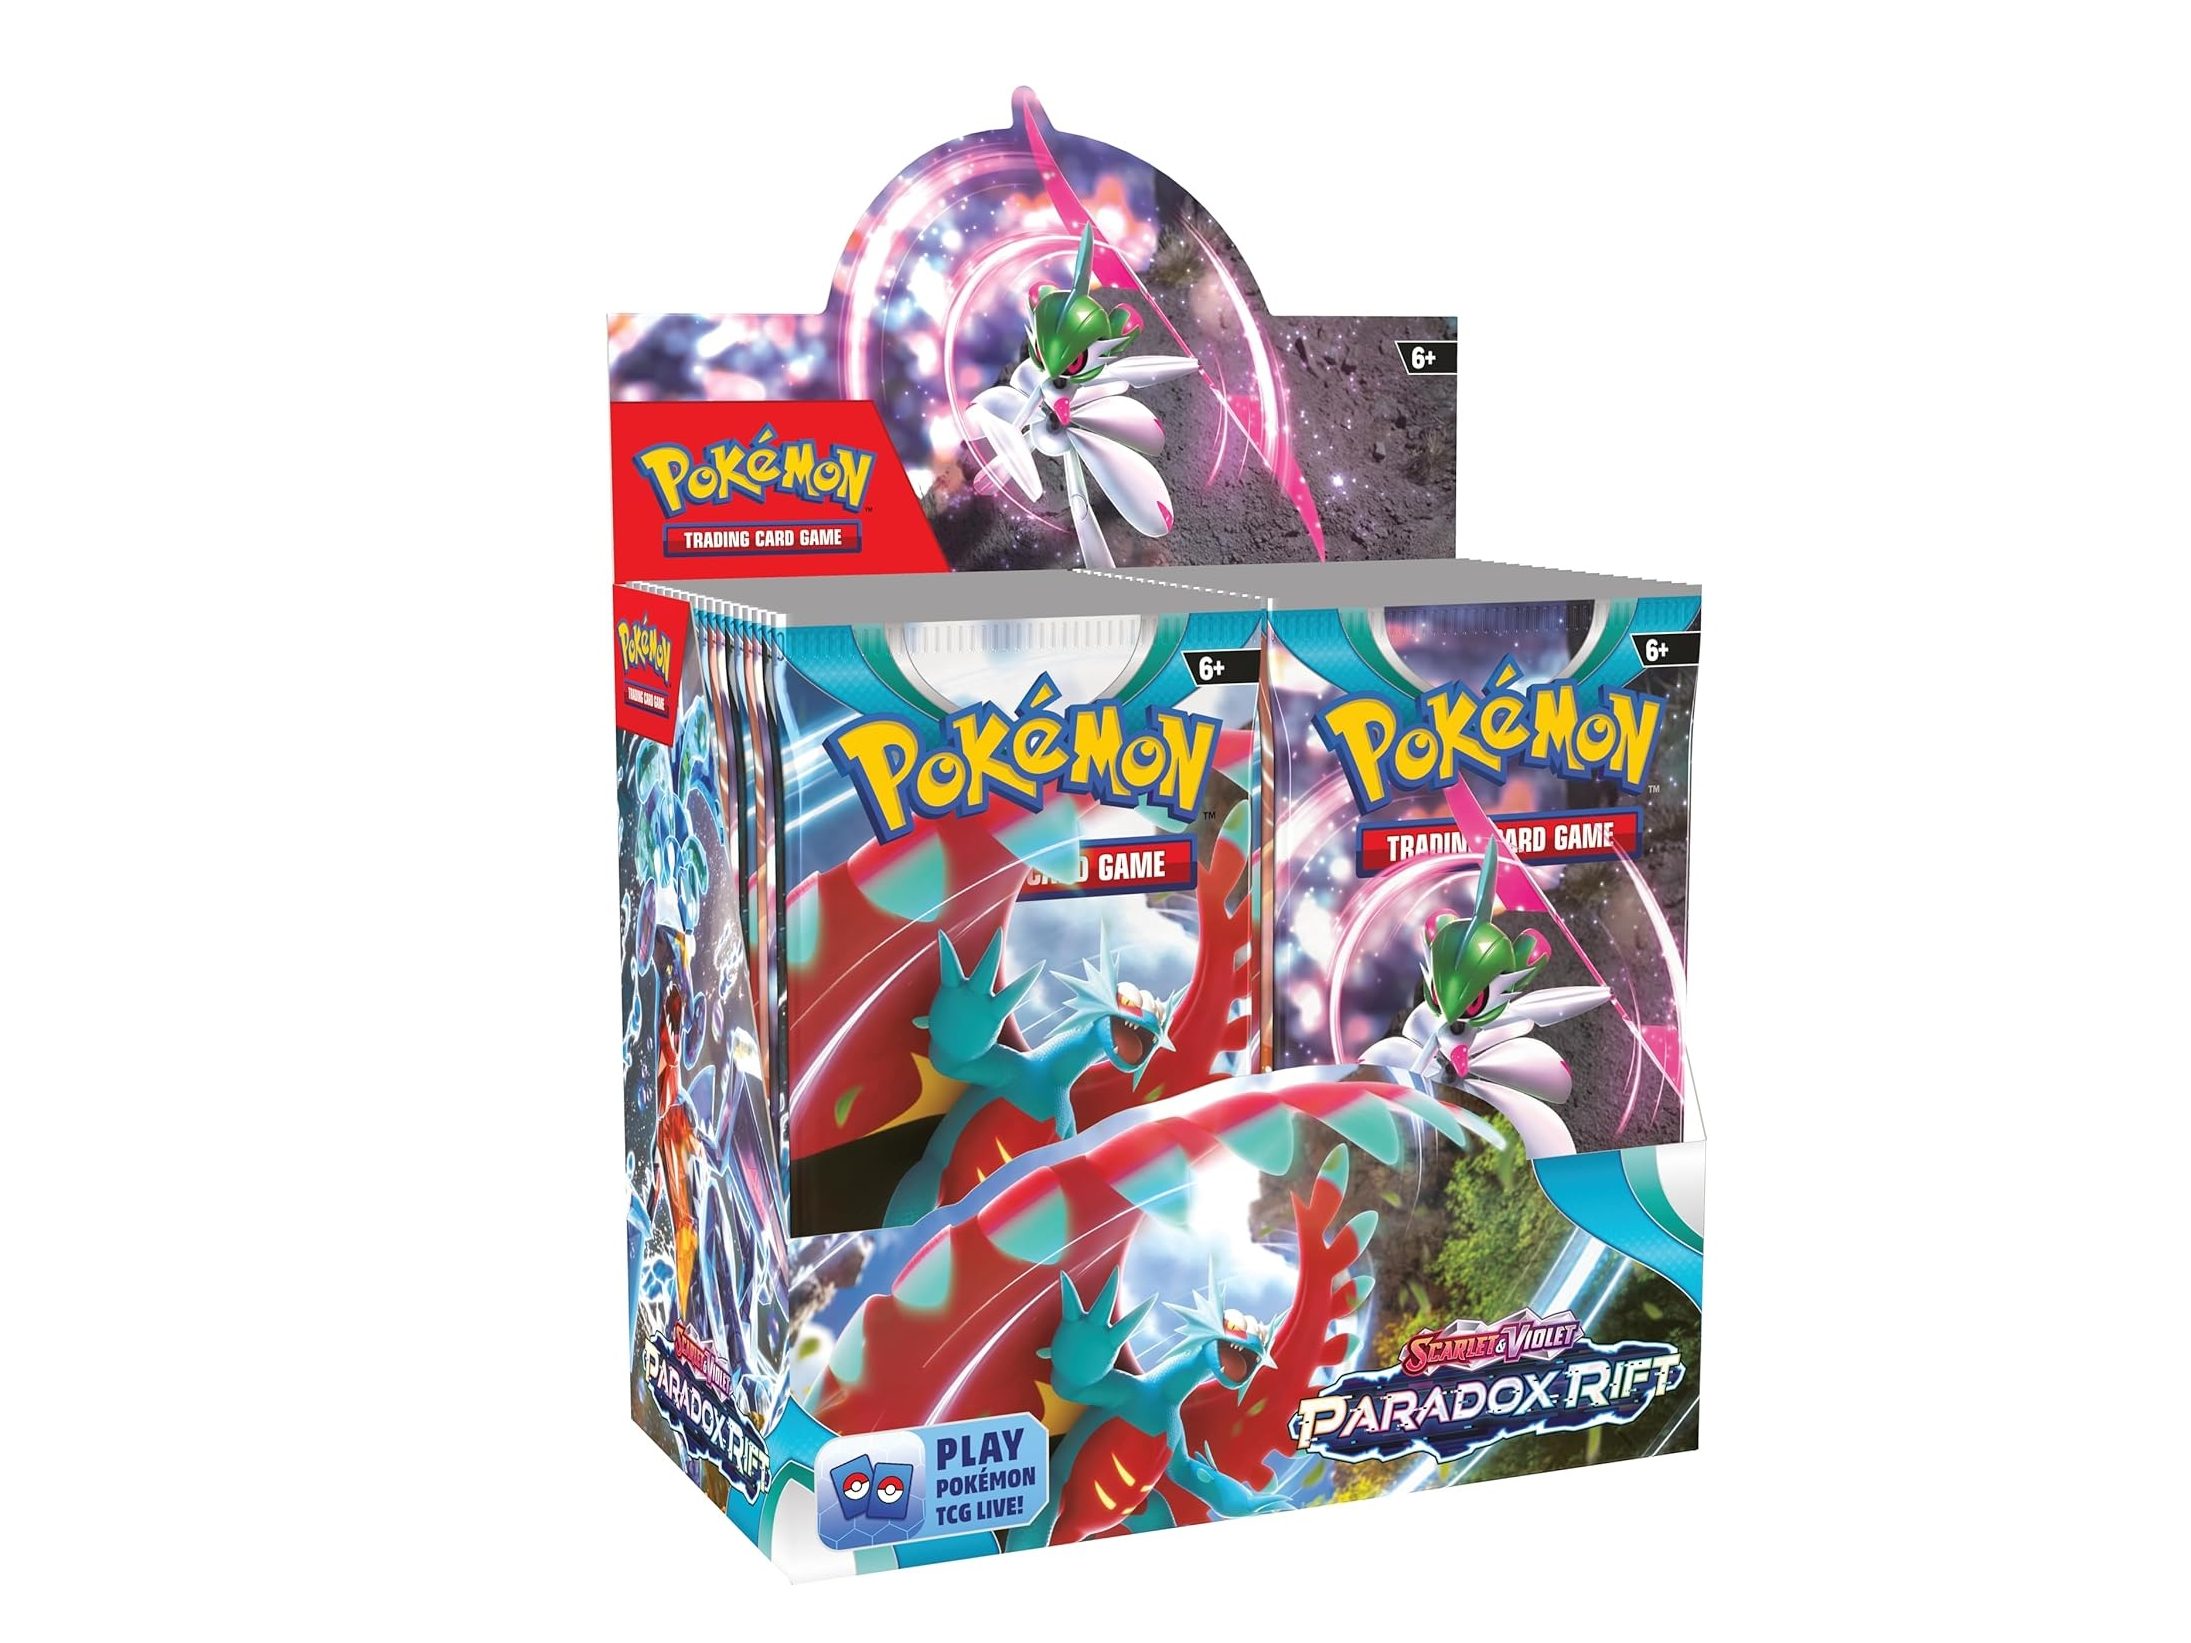 A 36-count booster pack box for Poke Scarlet and Violet: Paradox Rift.